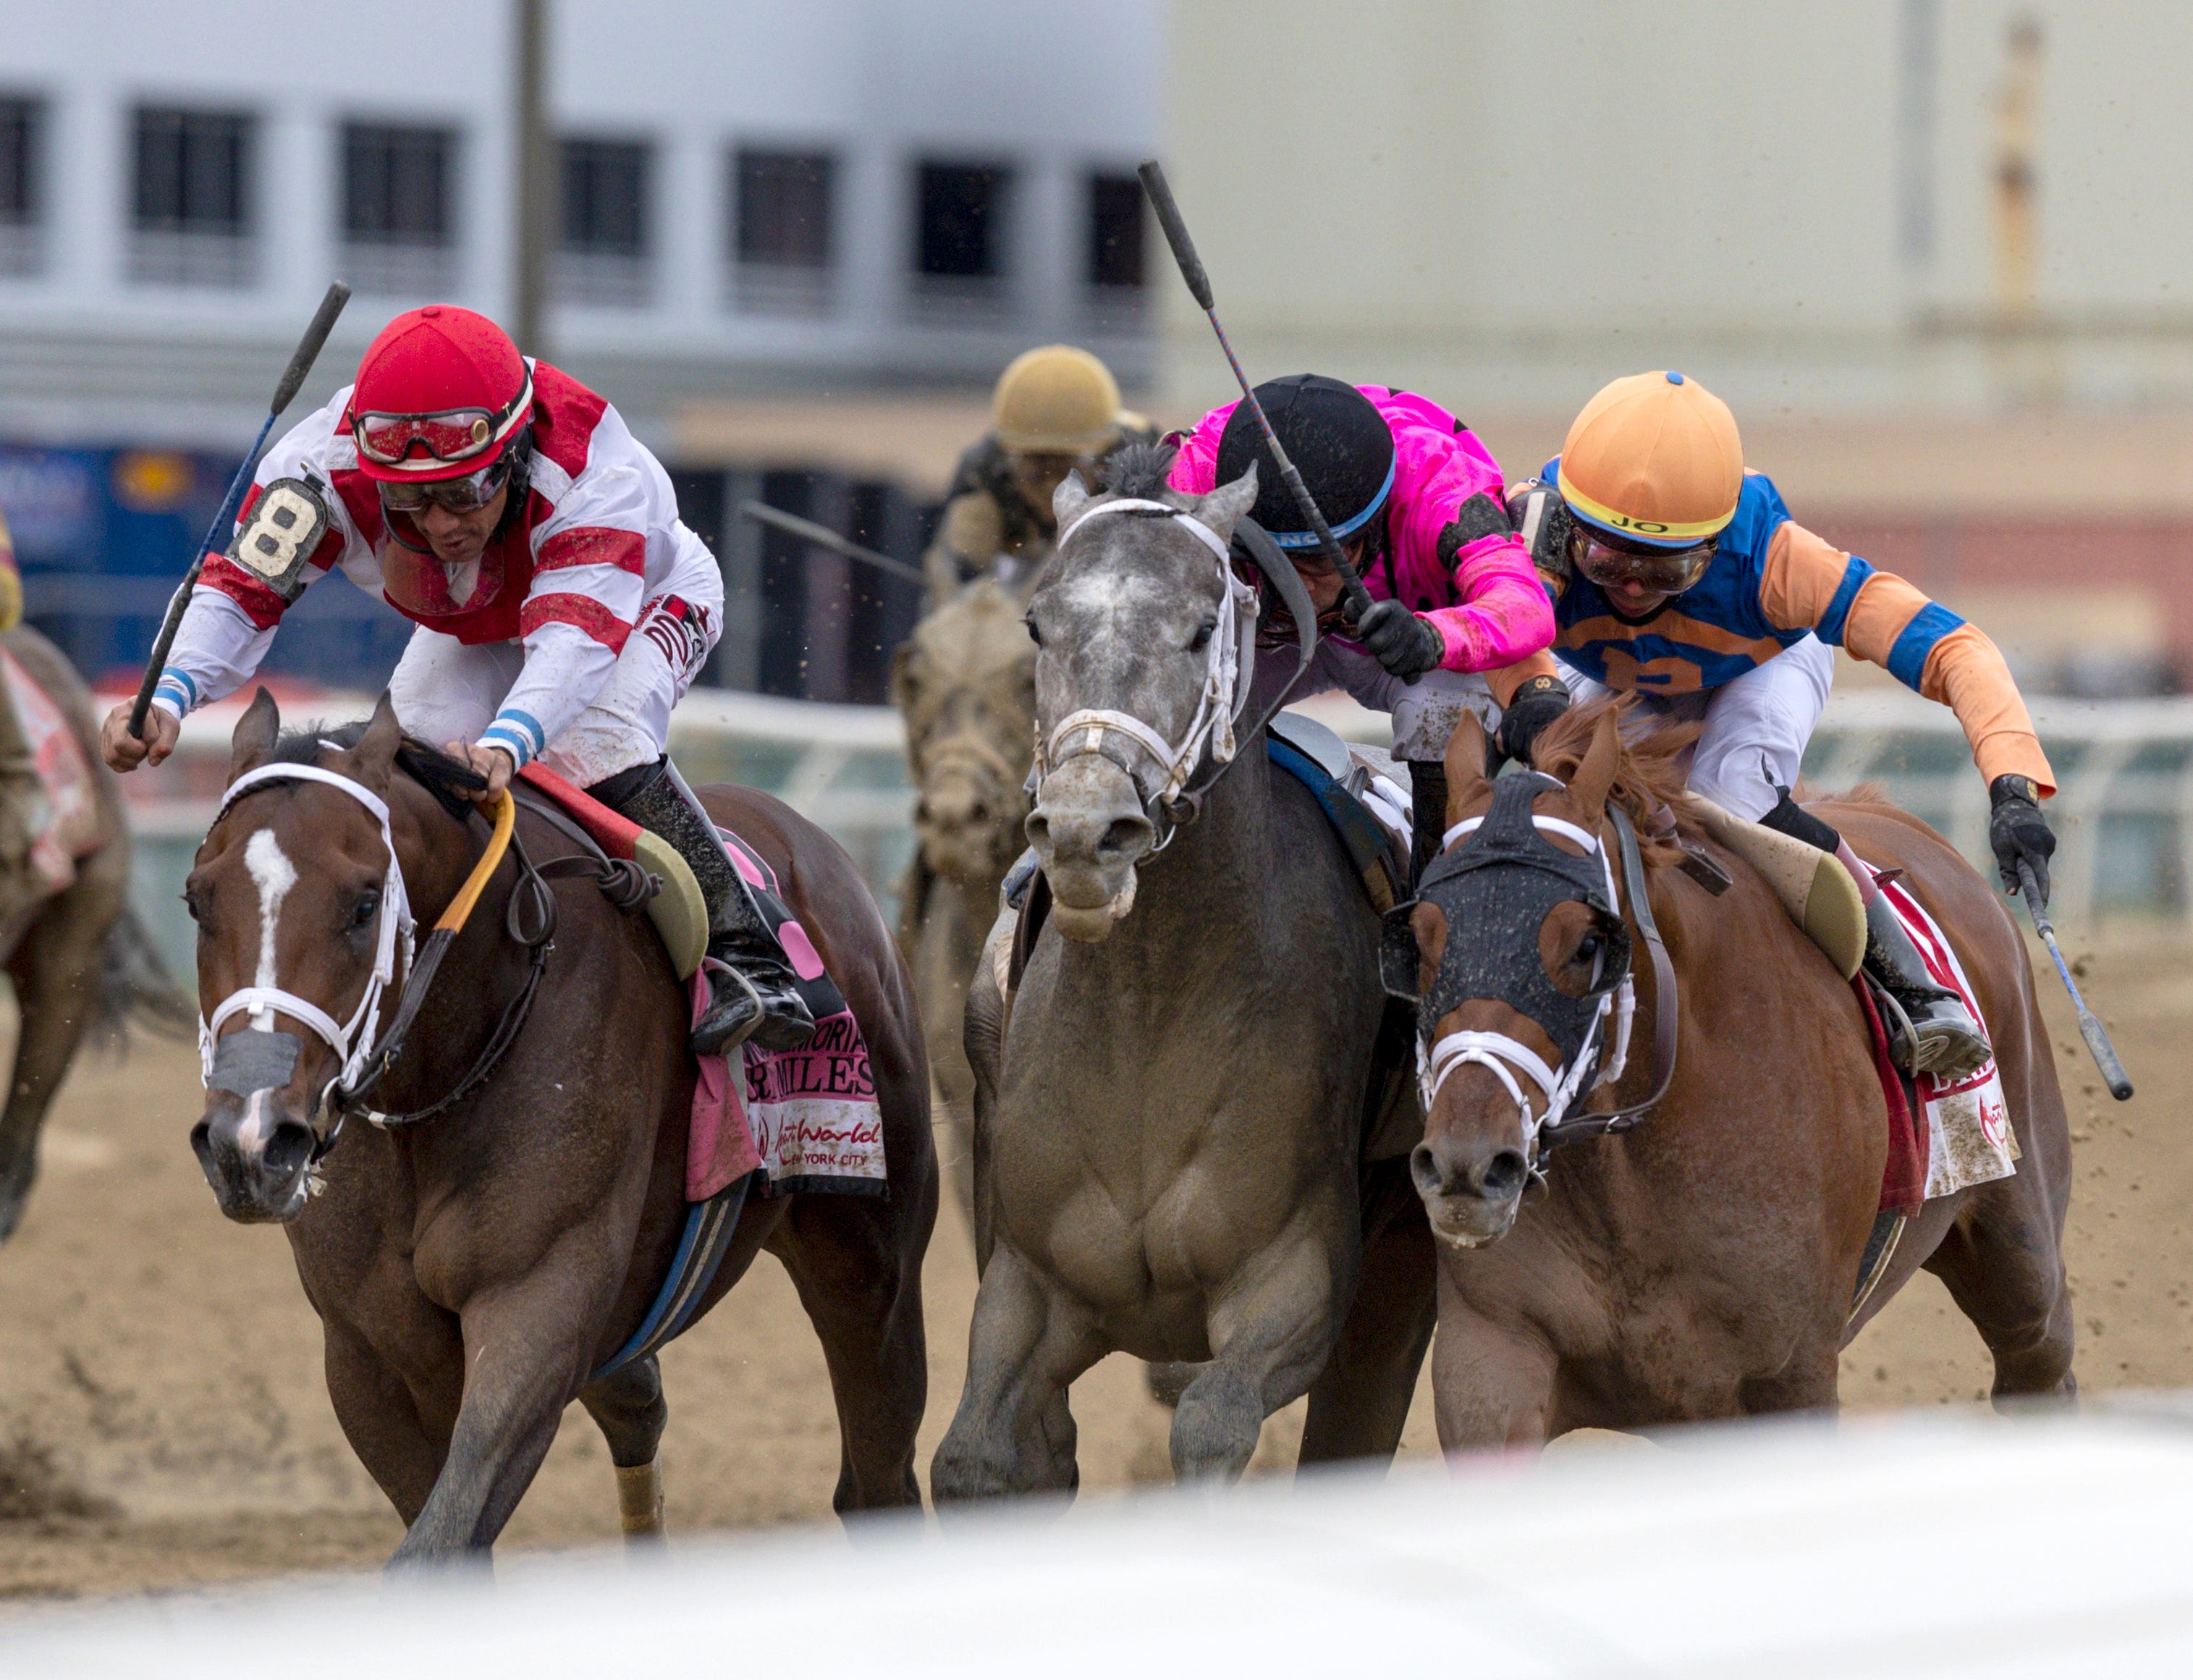 Road to the 2023 Kentucky Derby Wood Memorial analysis